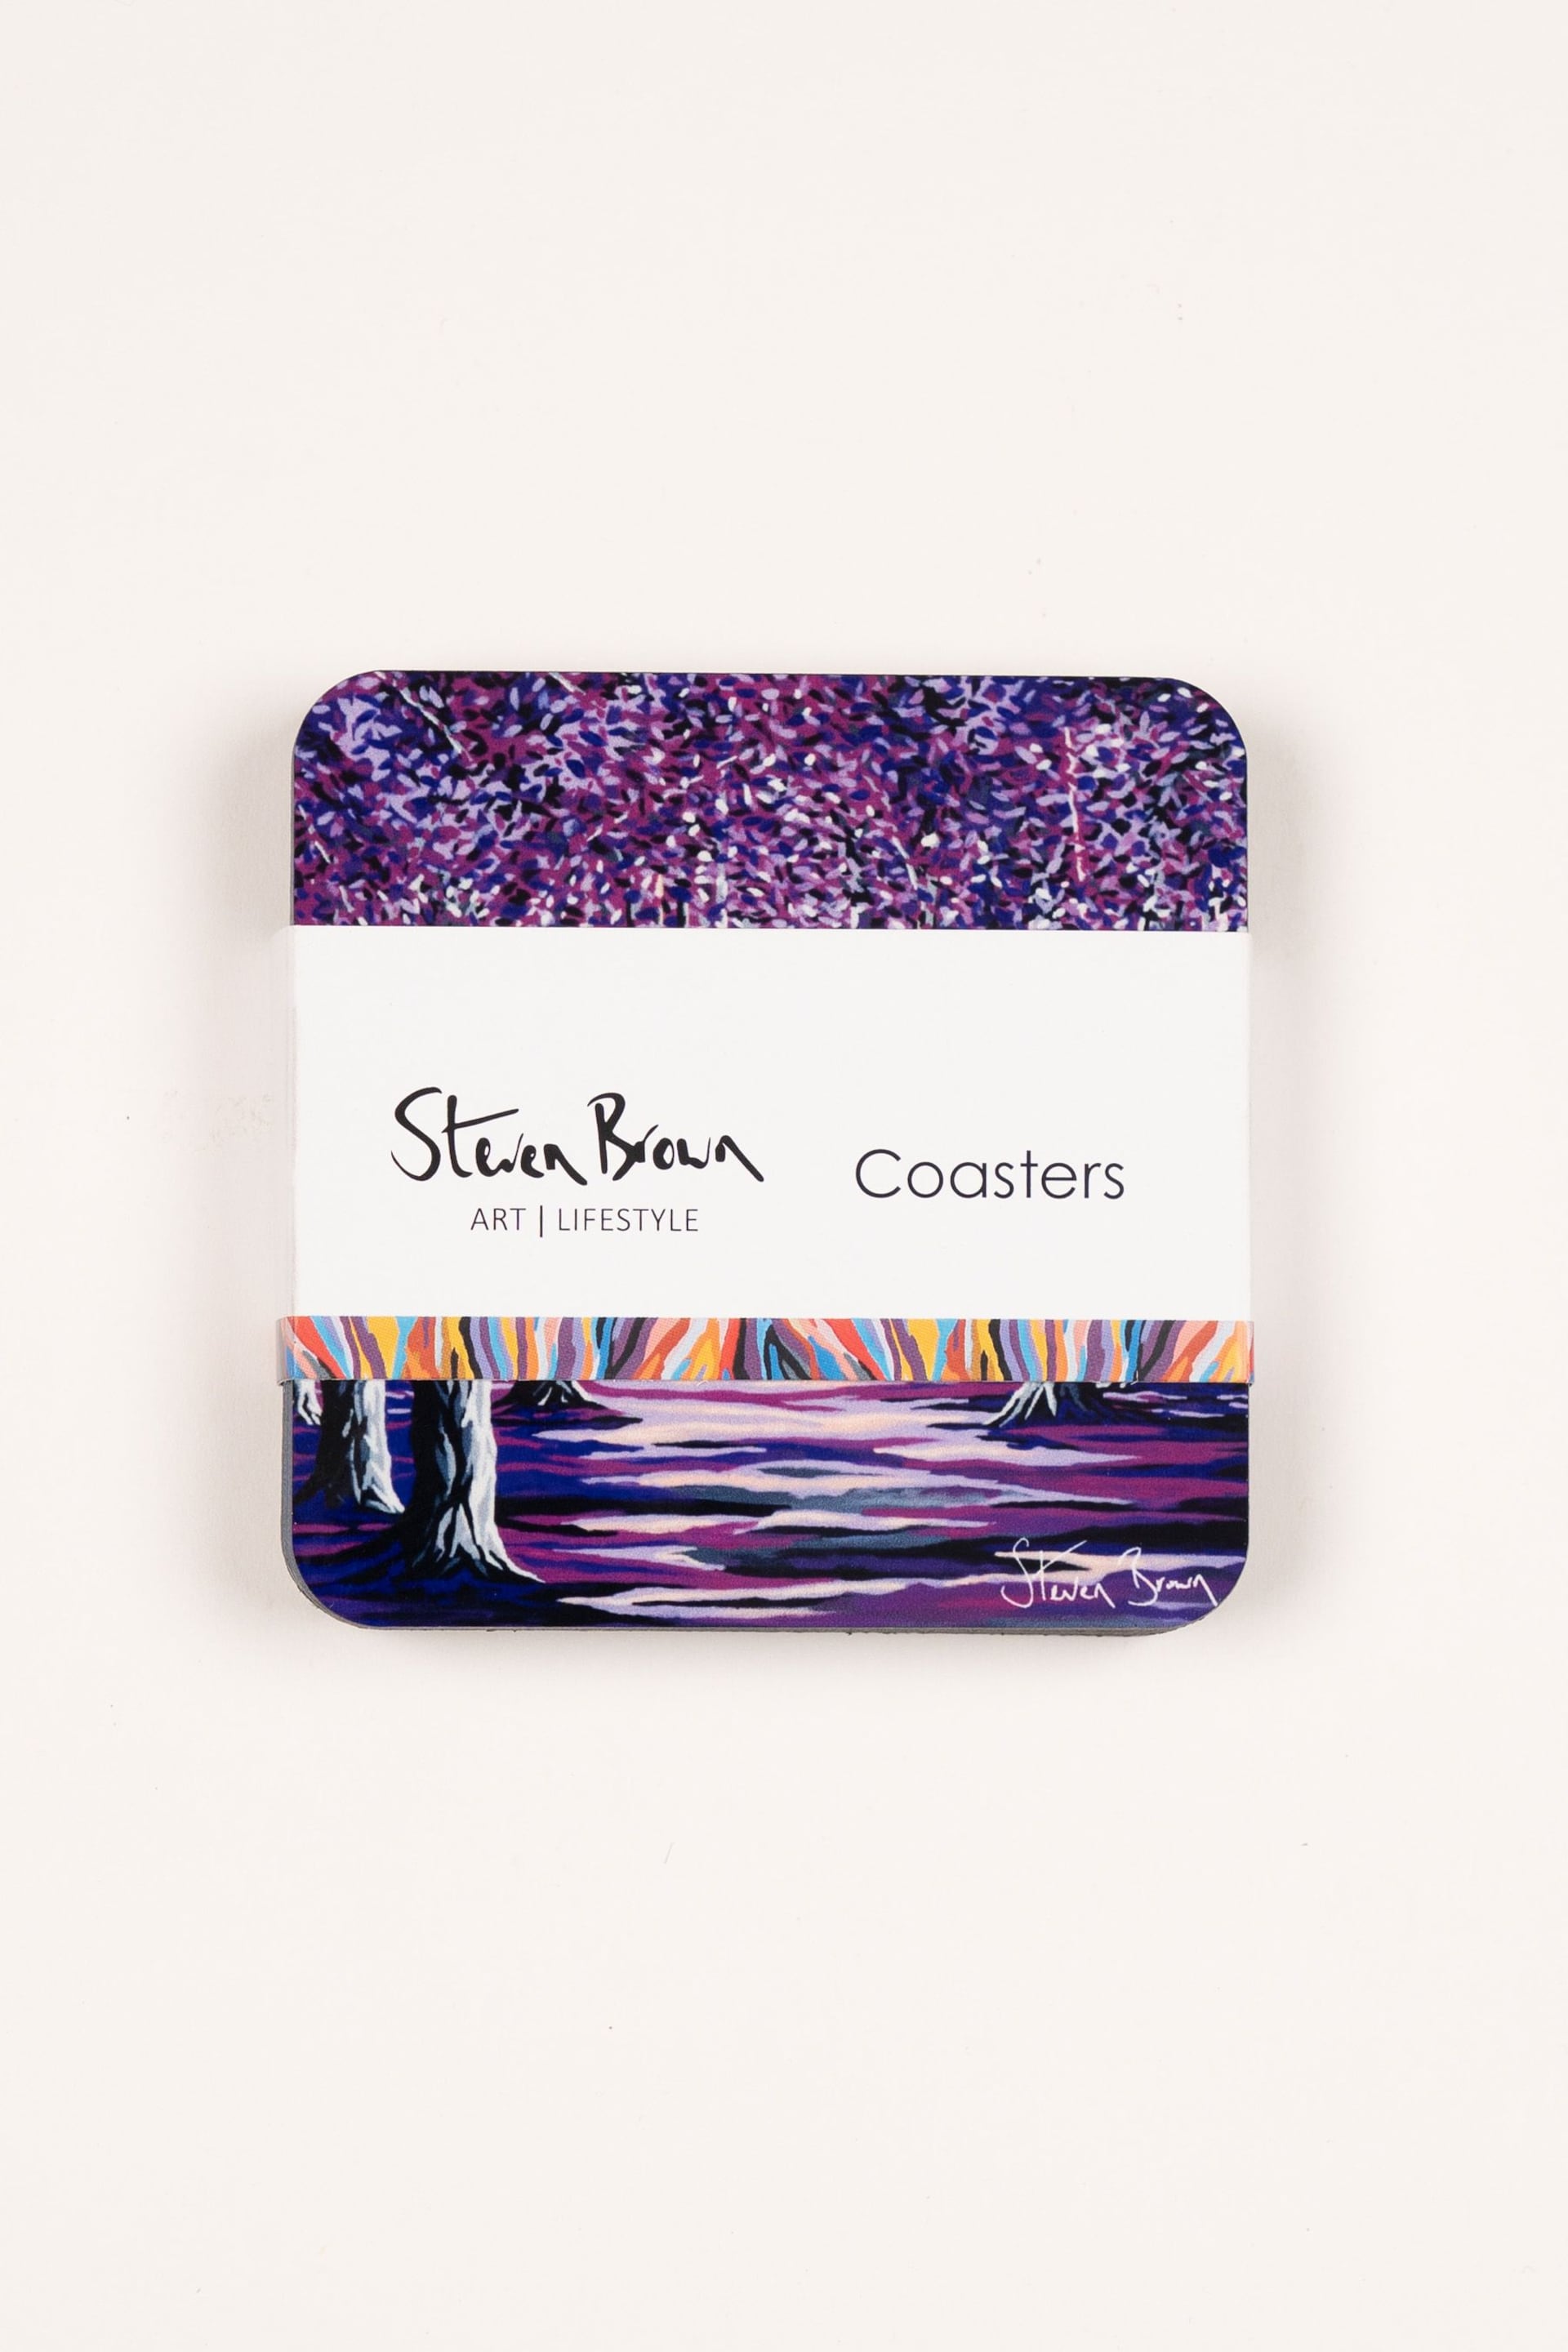 Steven Brown Art Set of 4 Purple Forest Coasters - Image 2 of 3